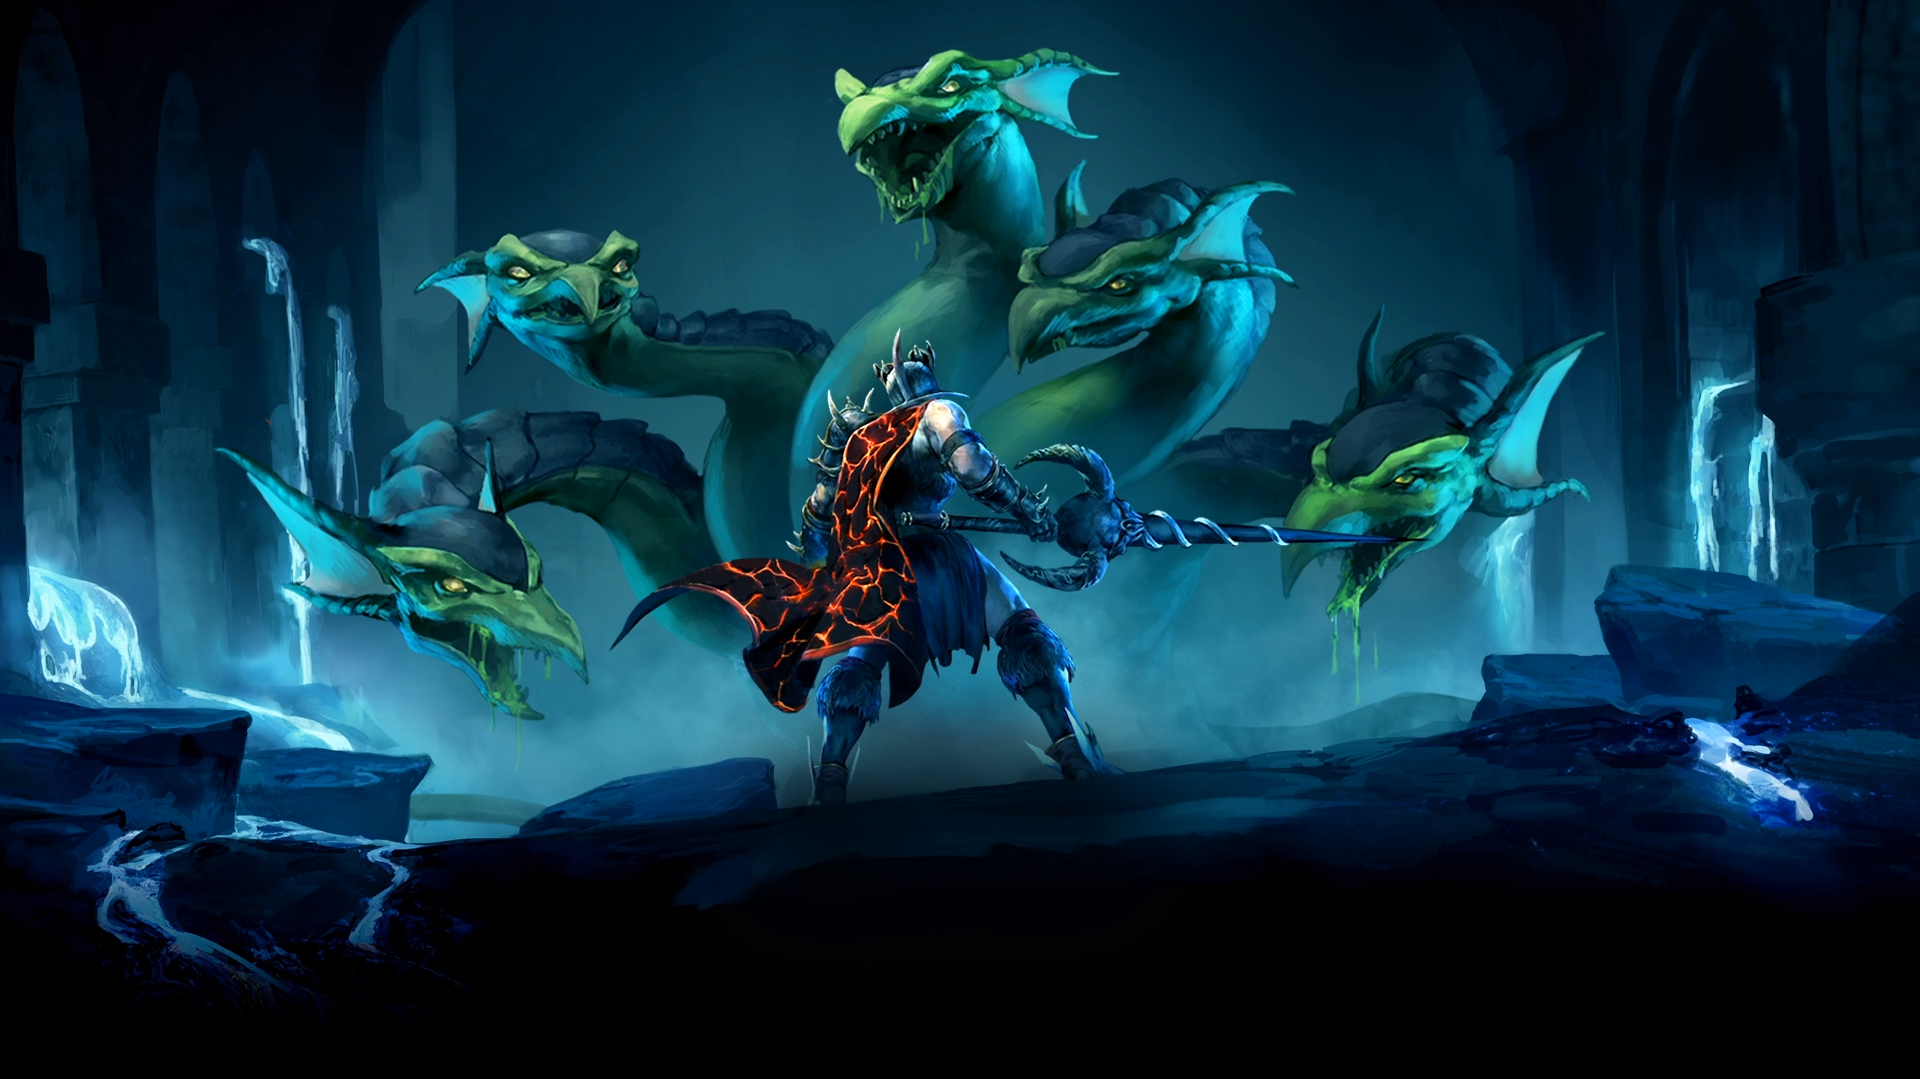 Free download The official Hydra wallpaper 2007scape [1920x1079] for